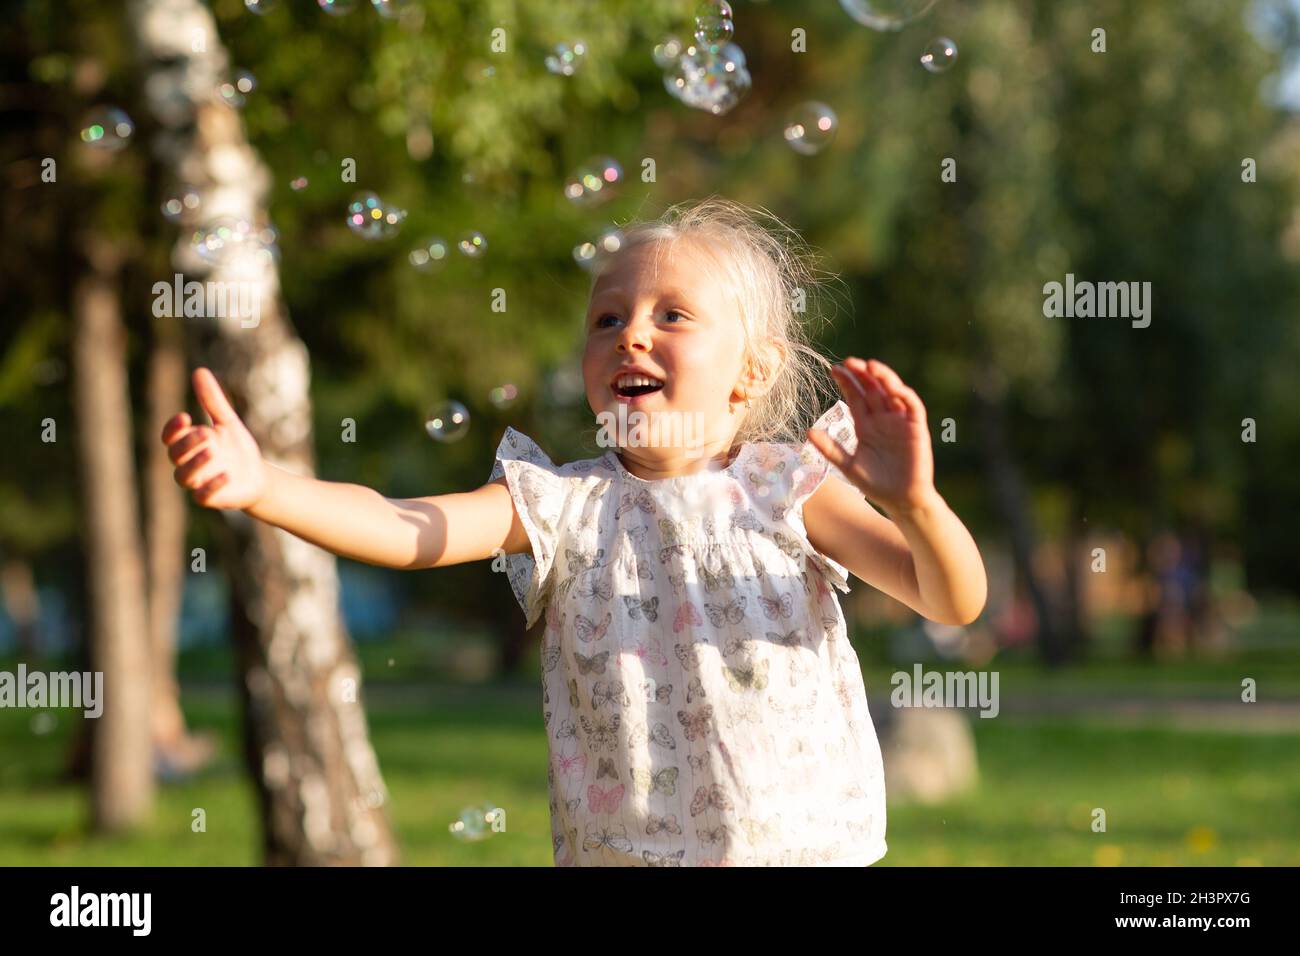 Little cute girl in the summer park blowing bubbles and having fun Stock Photo